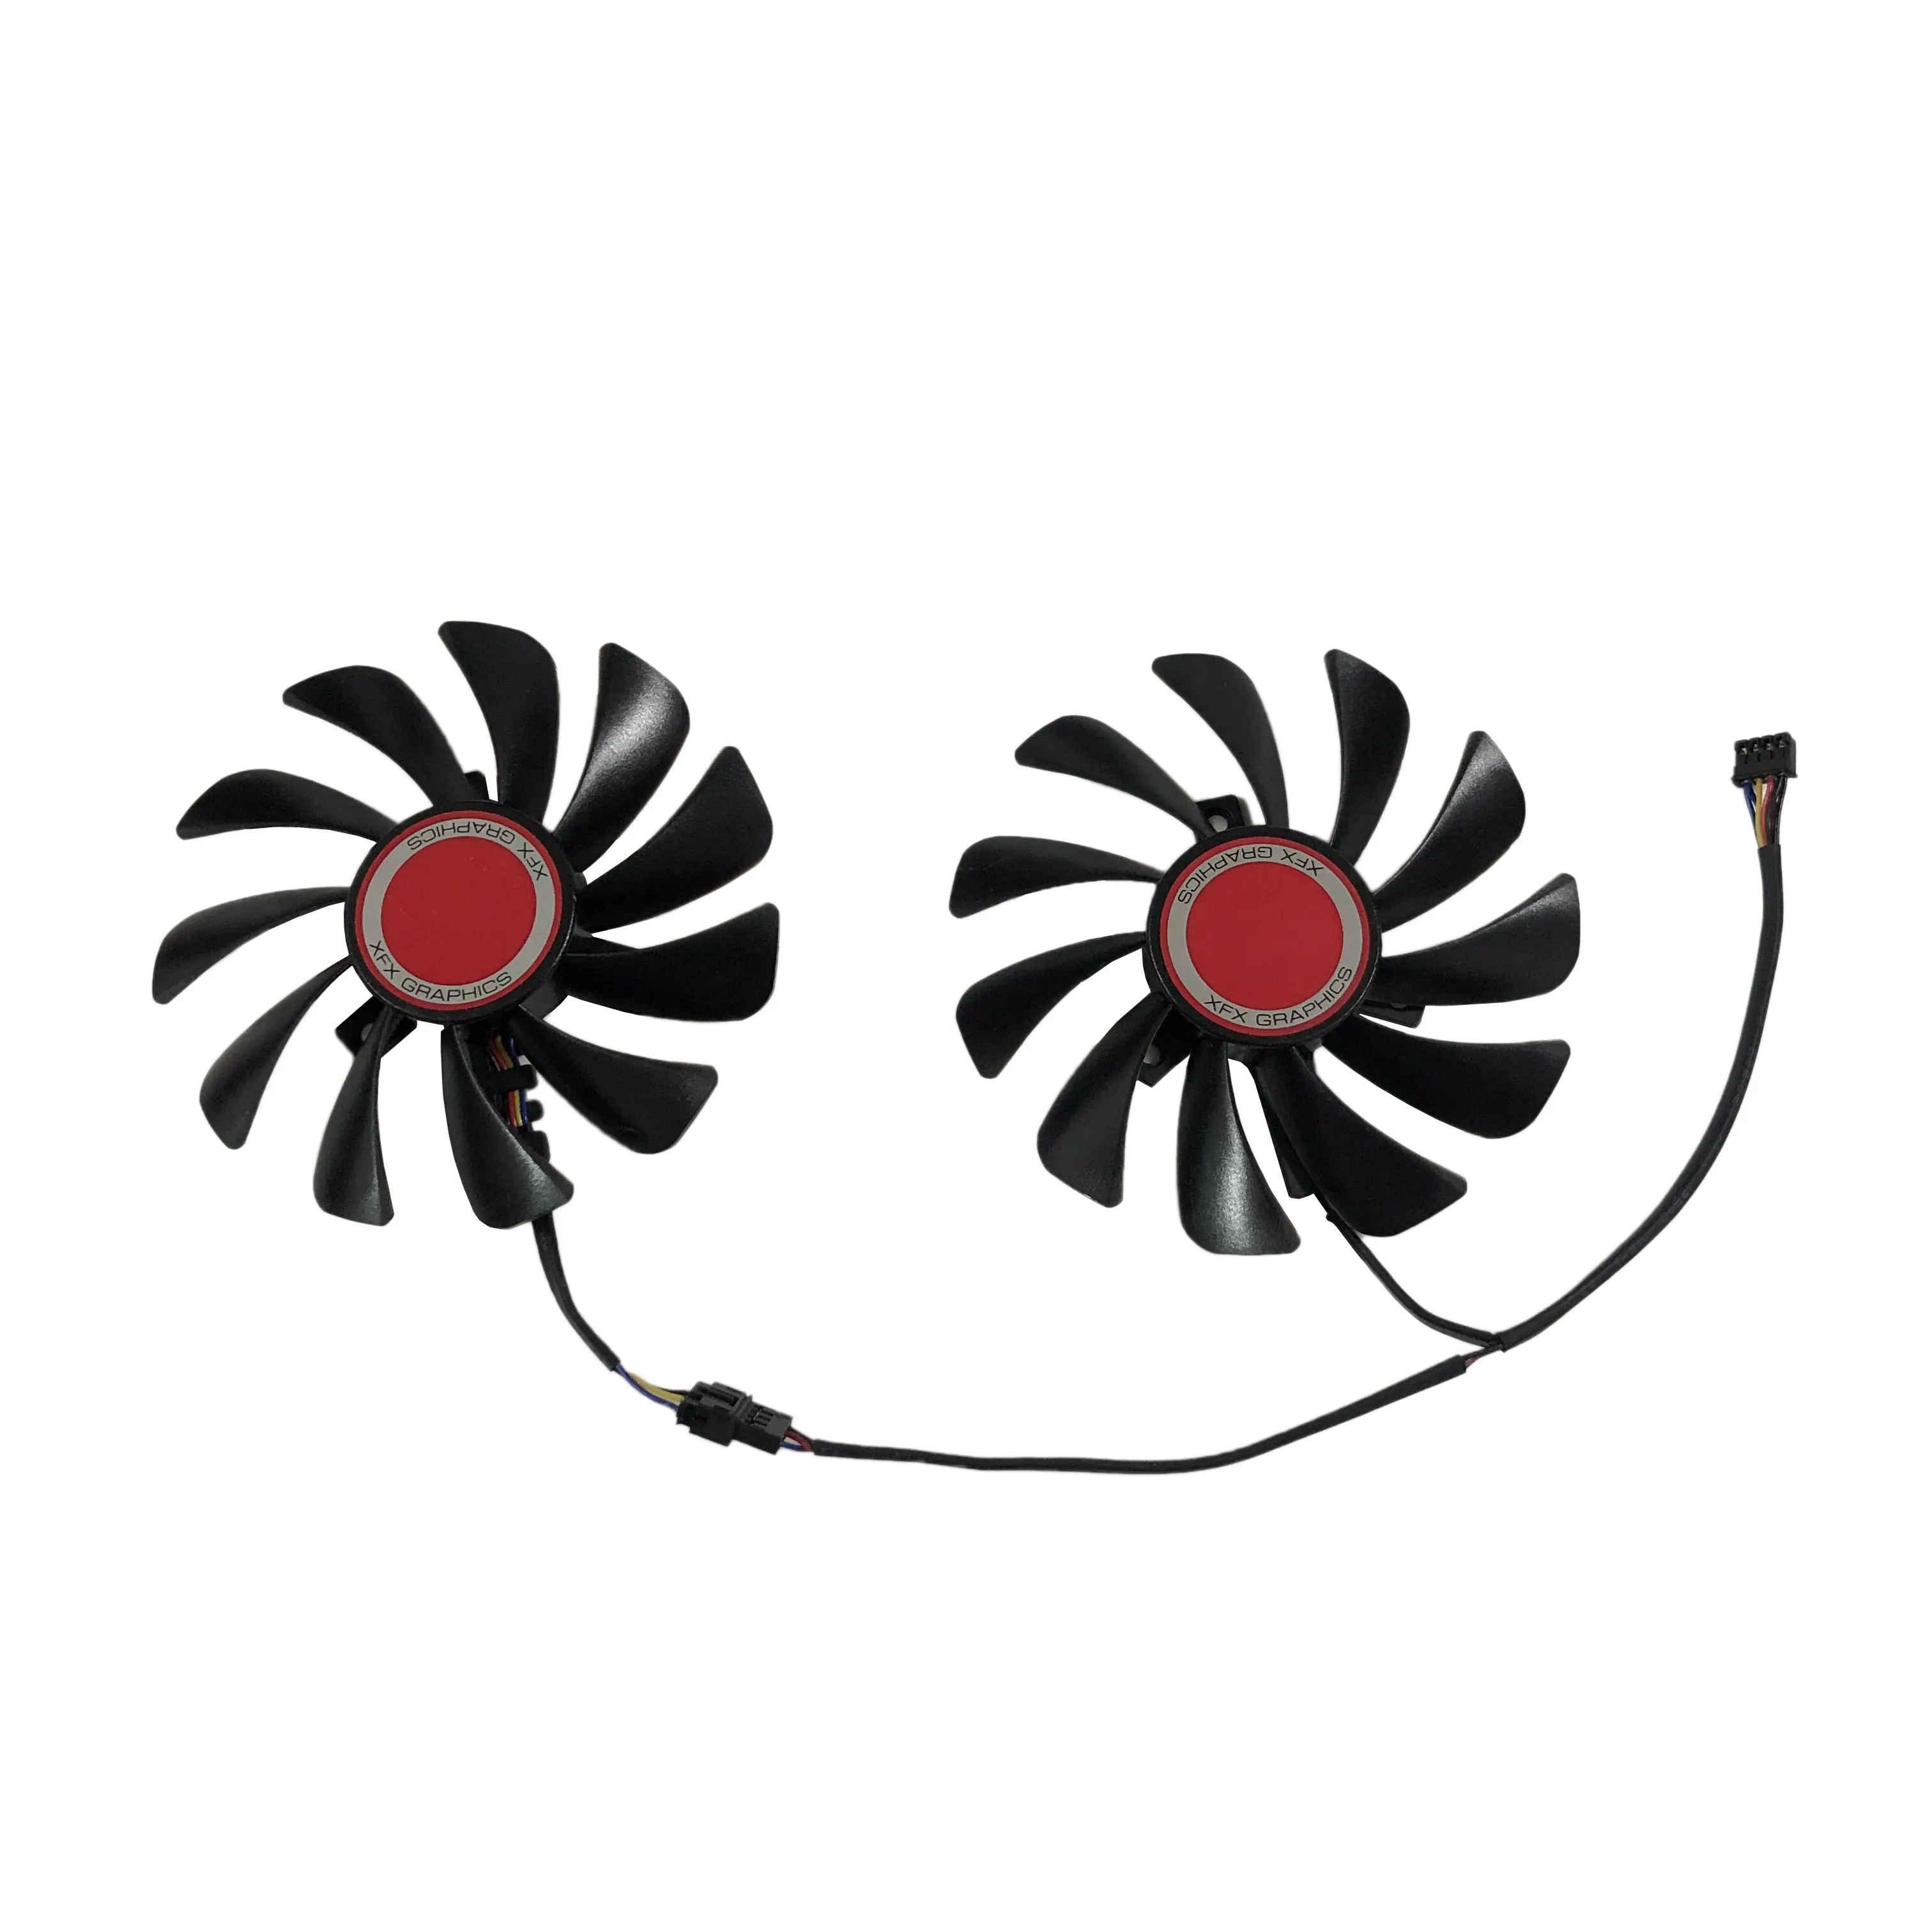 HIS RX 580 XFX RX580 590 GPU VGA Alternative Cooler Cooling Fan For HIS XFX RX 580 Graphics Video Cards As Replacement